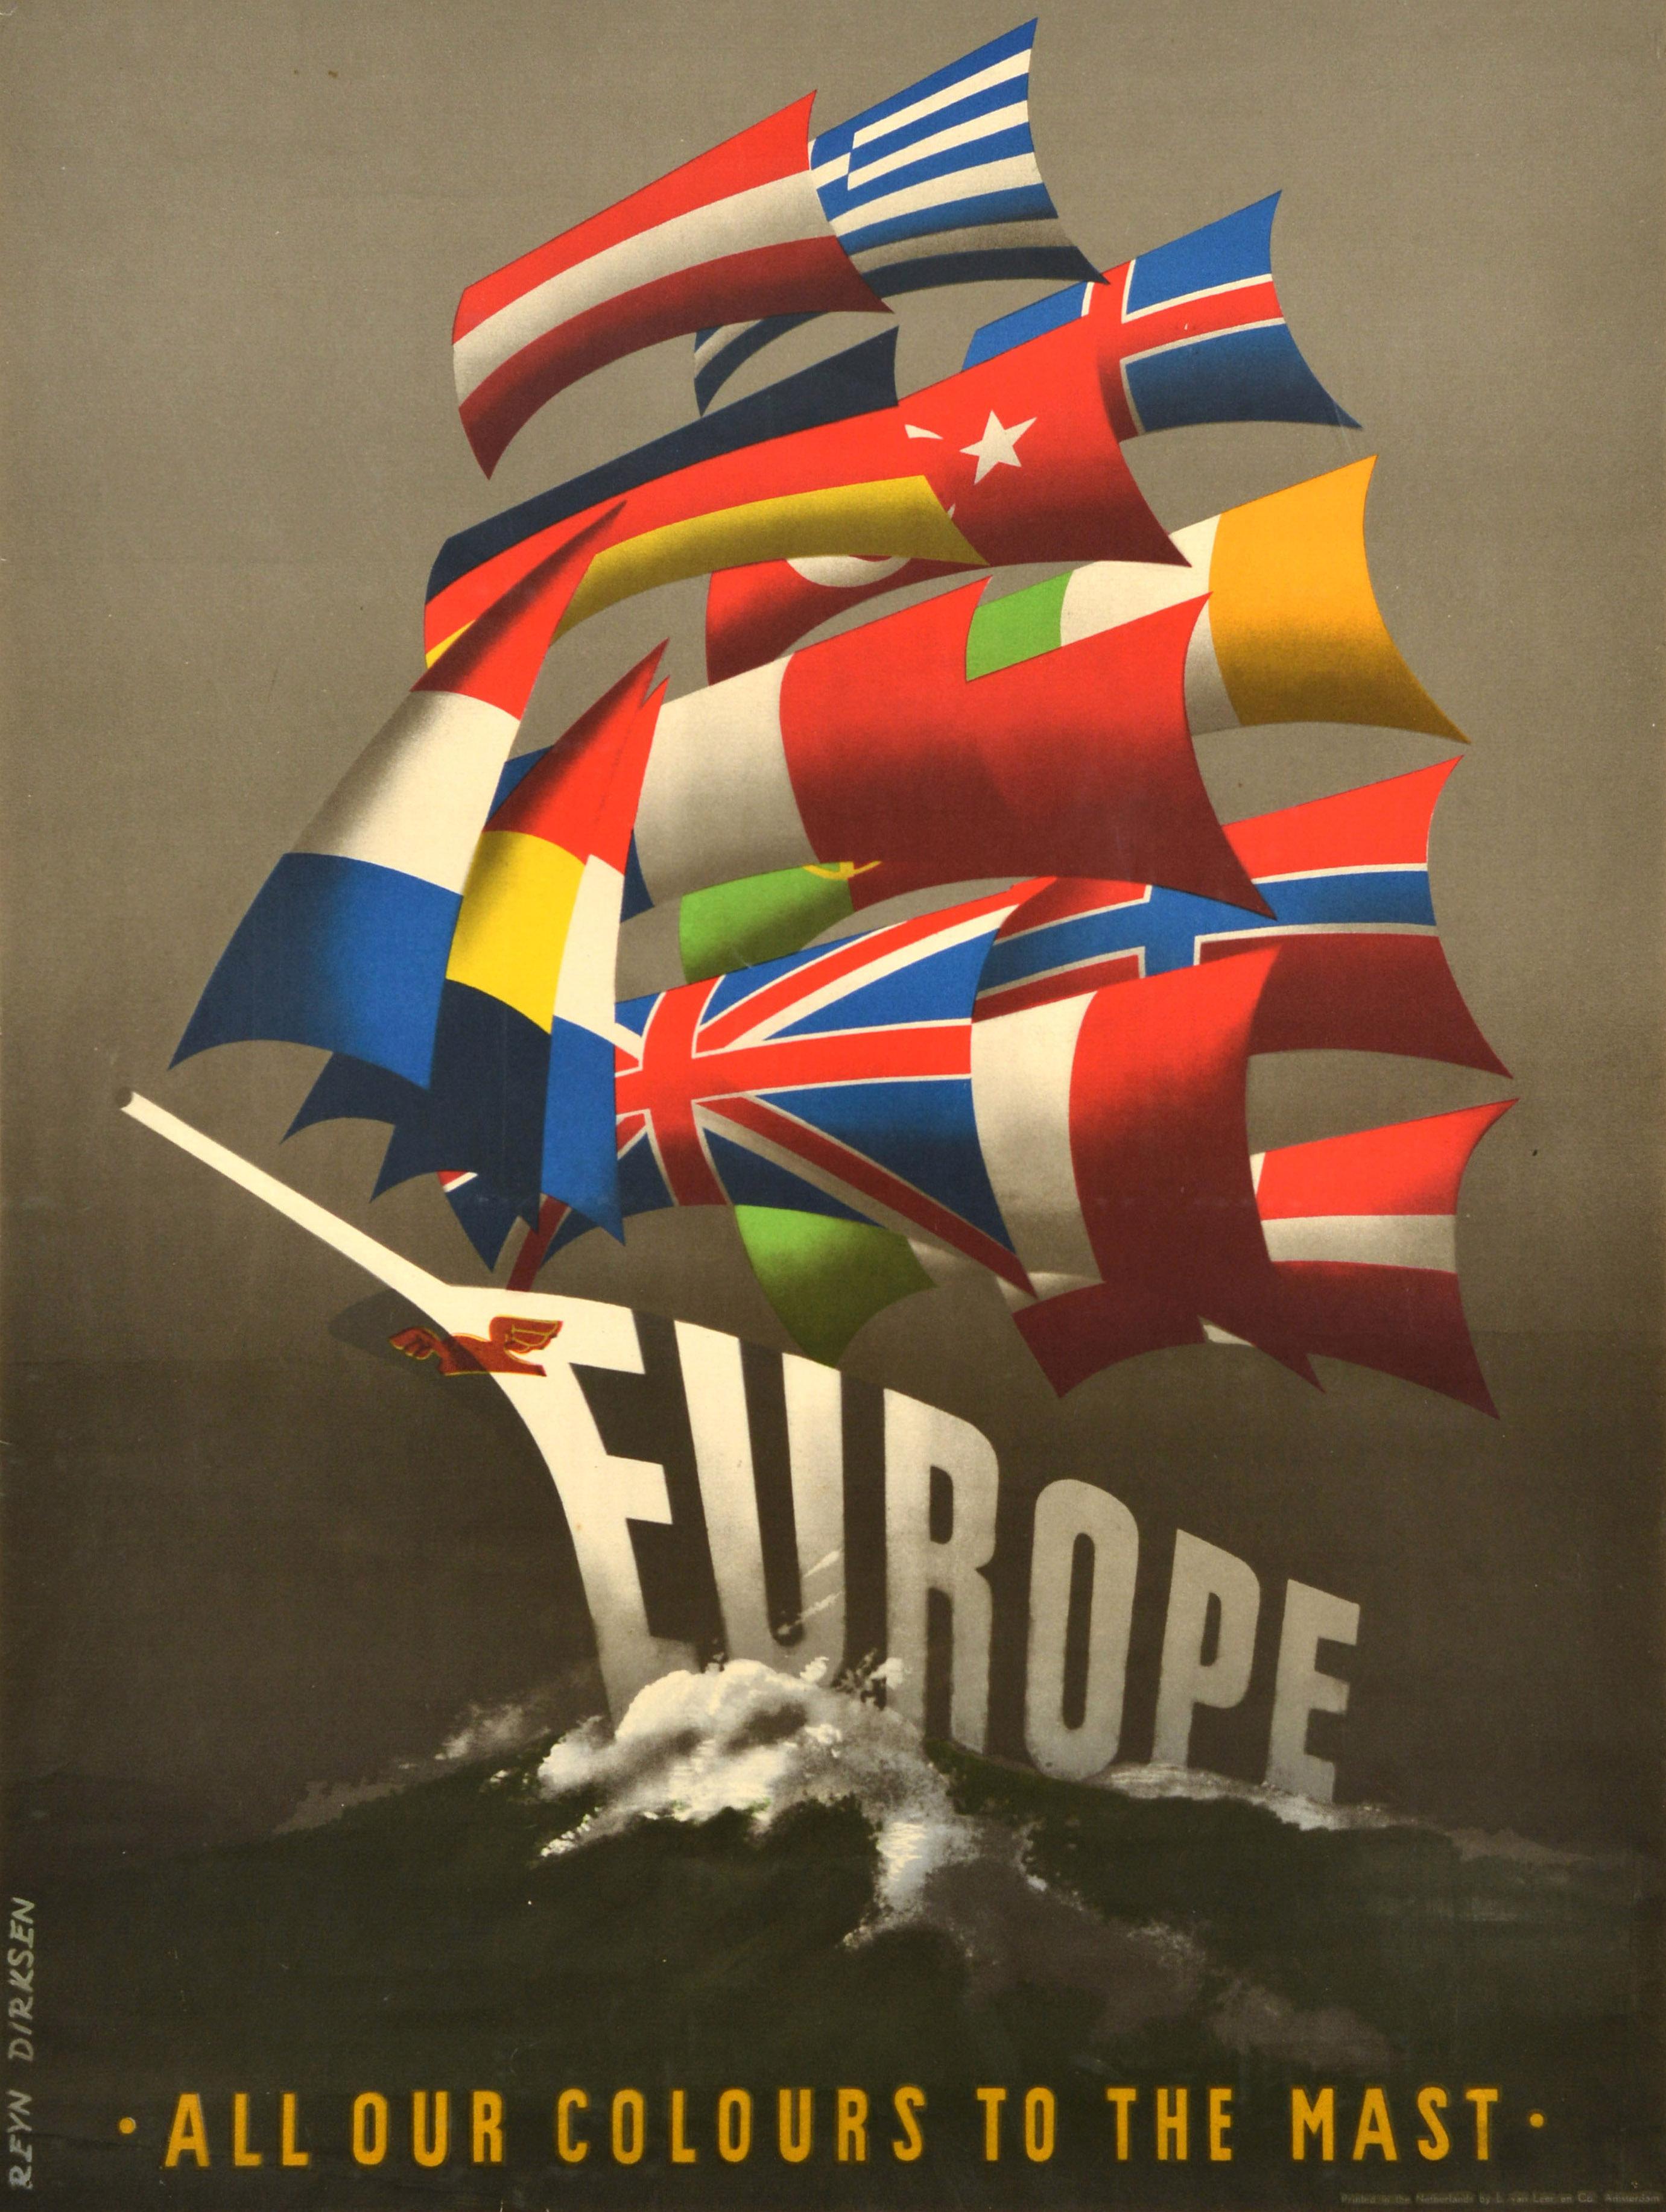 Original vintage propaganda poster for the post-war US sponsored ERP European Recovery Program (1948) known as the Marshall Plan - Europe All our Colours to the Mast - featuring a fantastic nautical design by Reyn Dirksen (1924-1999) depicting a